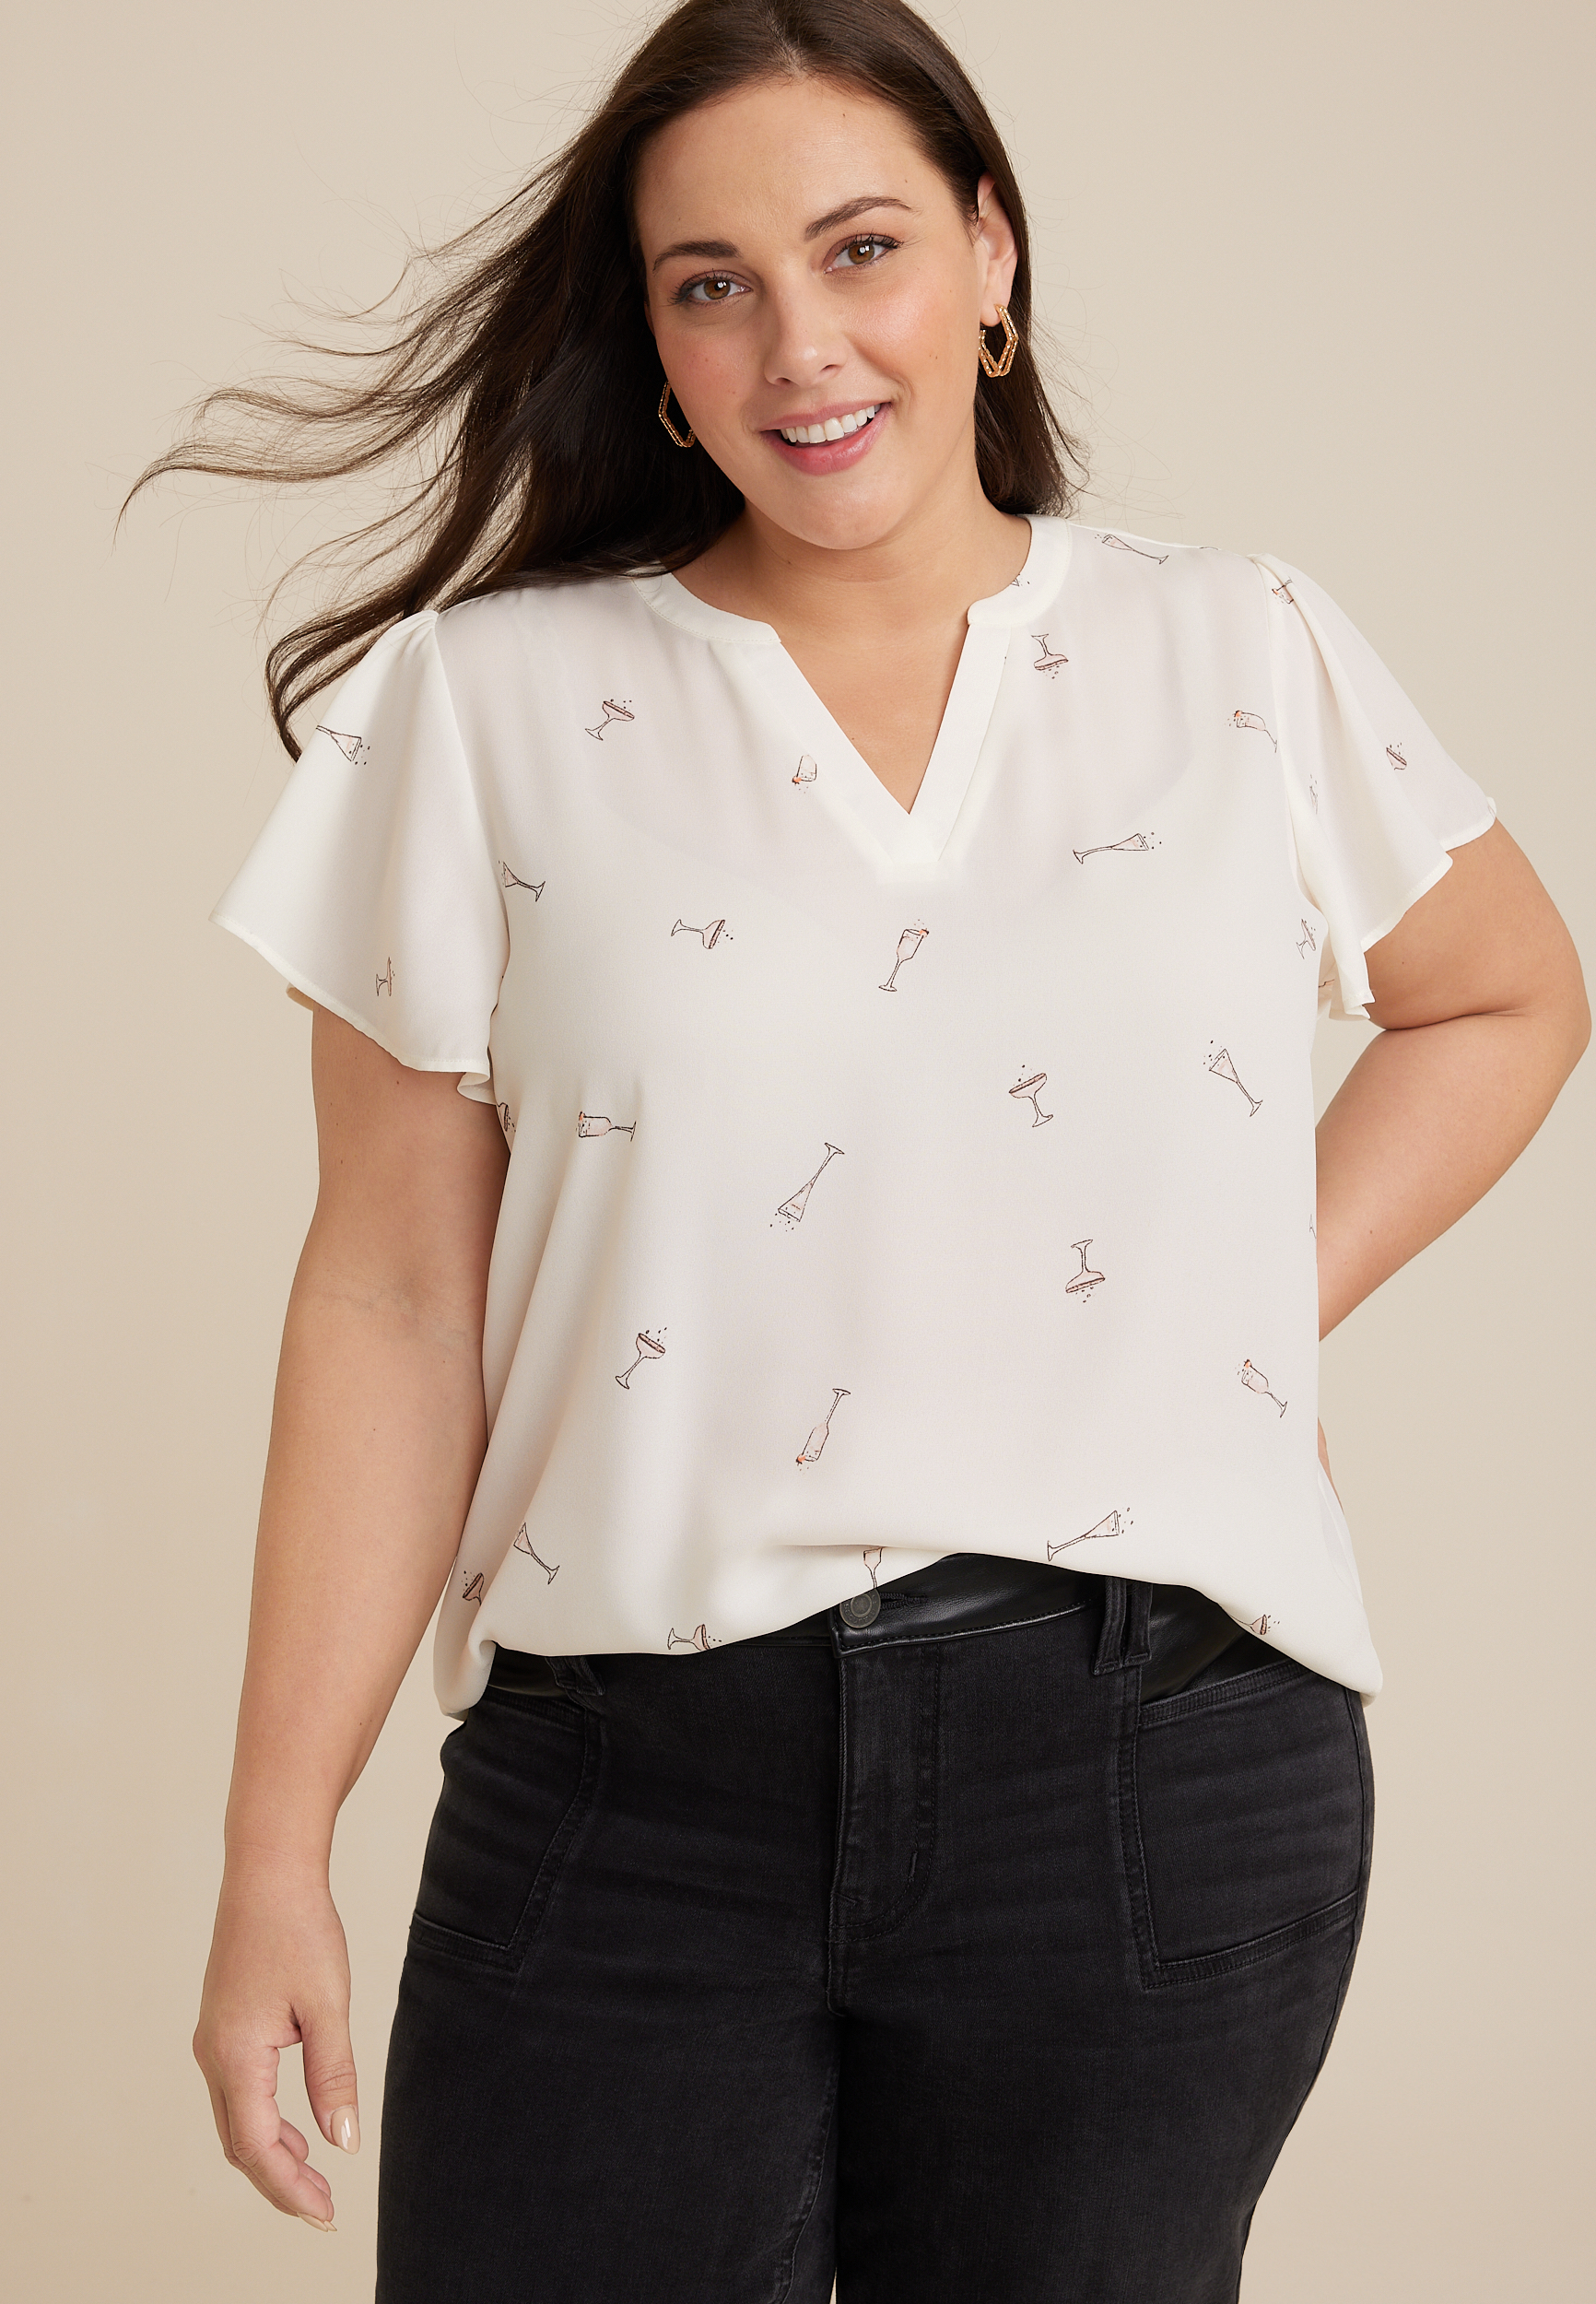 RPVATI Women Blouses and Shirts Plus Size Feather Button Up Womens